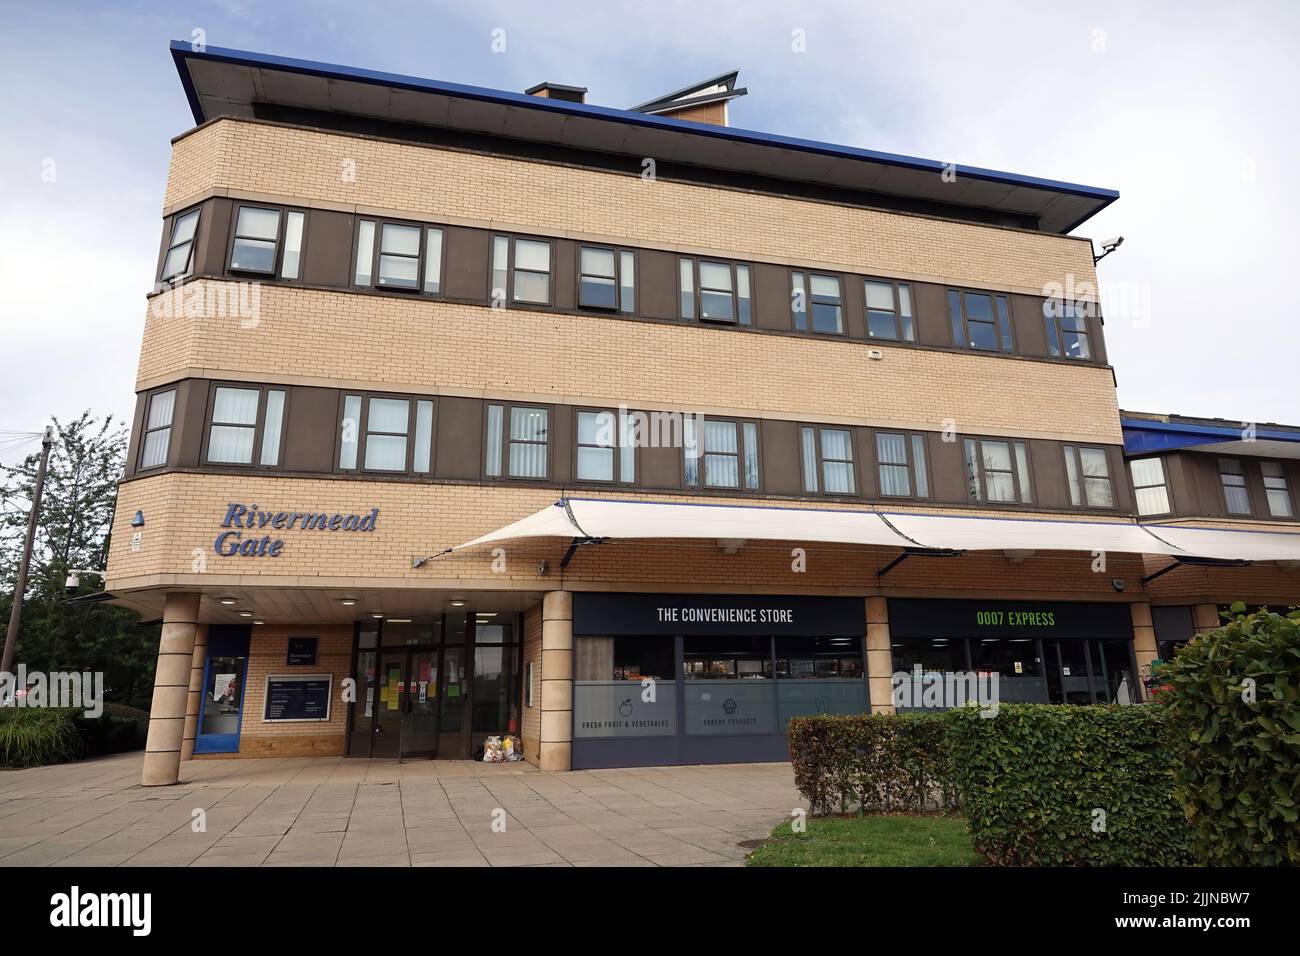 The Rivermead Gate Medical Centre and retail premises, Anglia Ruskin University, Chelmsford, Essex, UK Stock Photo